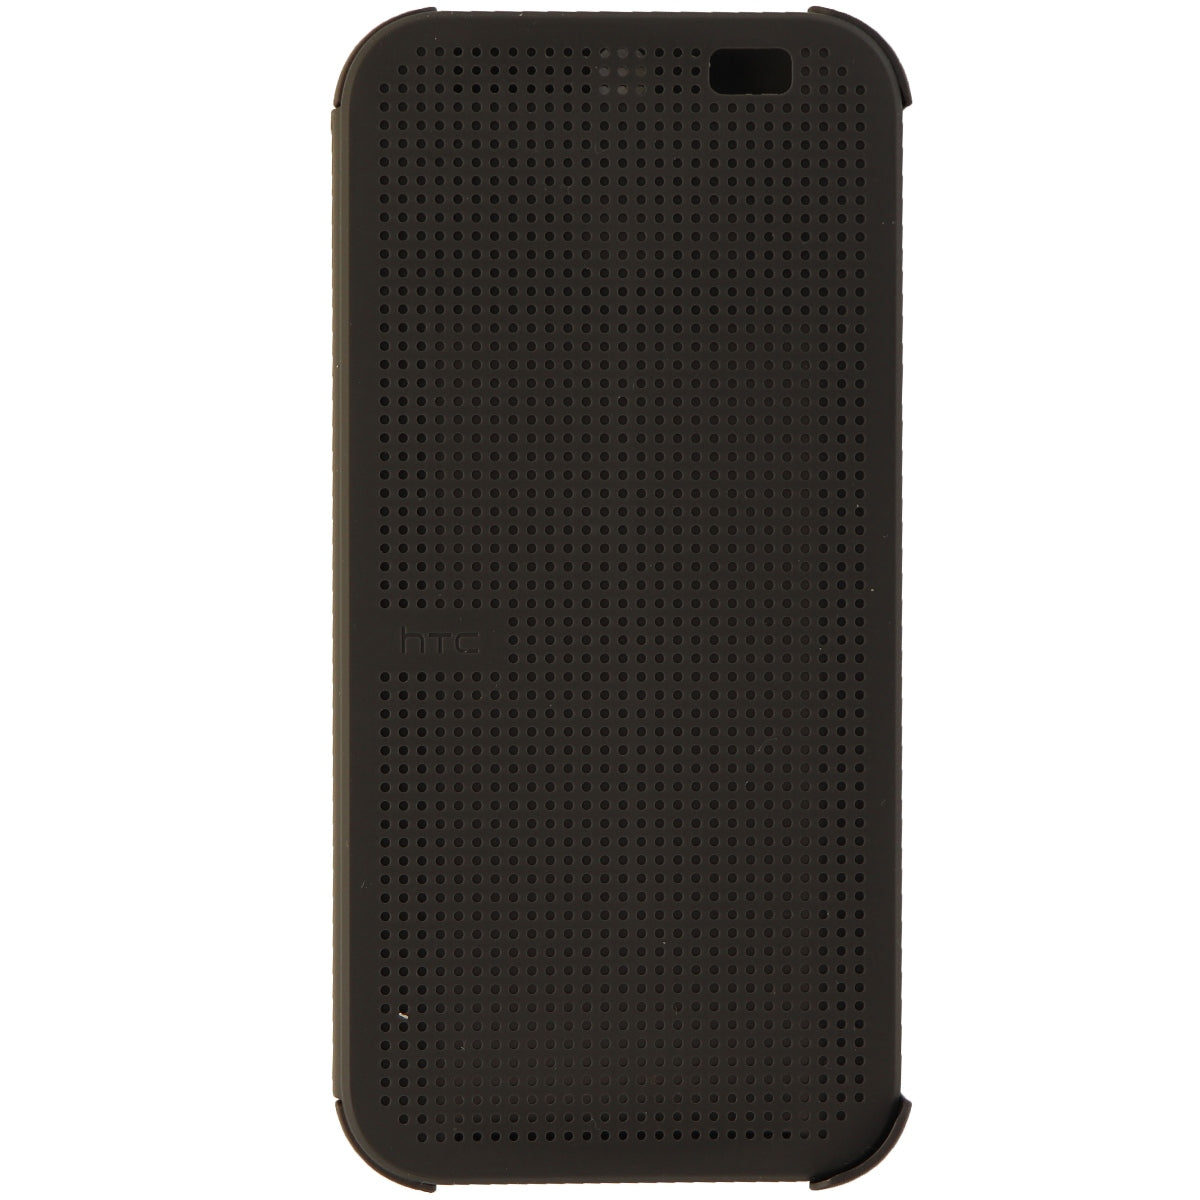 Verizon Wireless HTC Dot View Protective Case Cover for The HTC M8 - Gray Cell Phone - Cases, Covers & Skins Verizon    - Simple Cell Bulk Wholesale Pricing - USA Seller